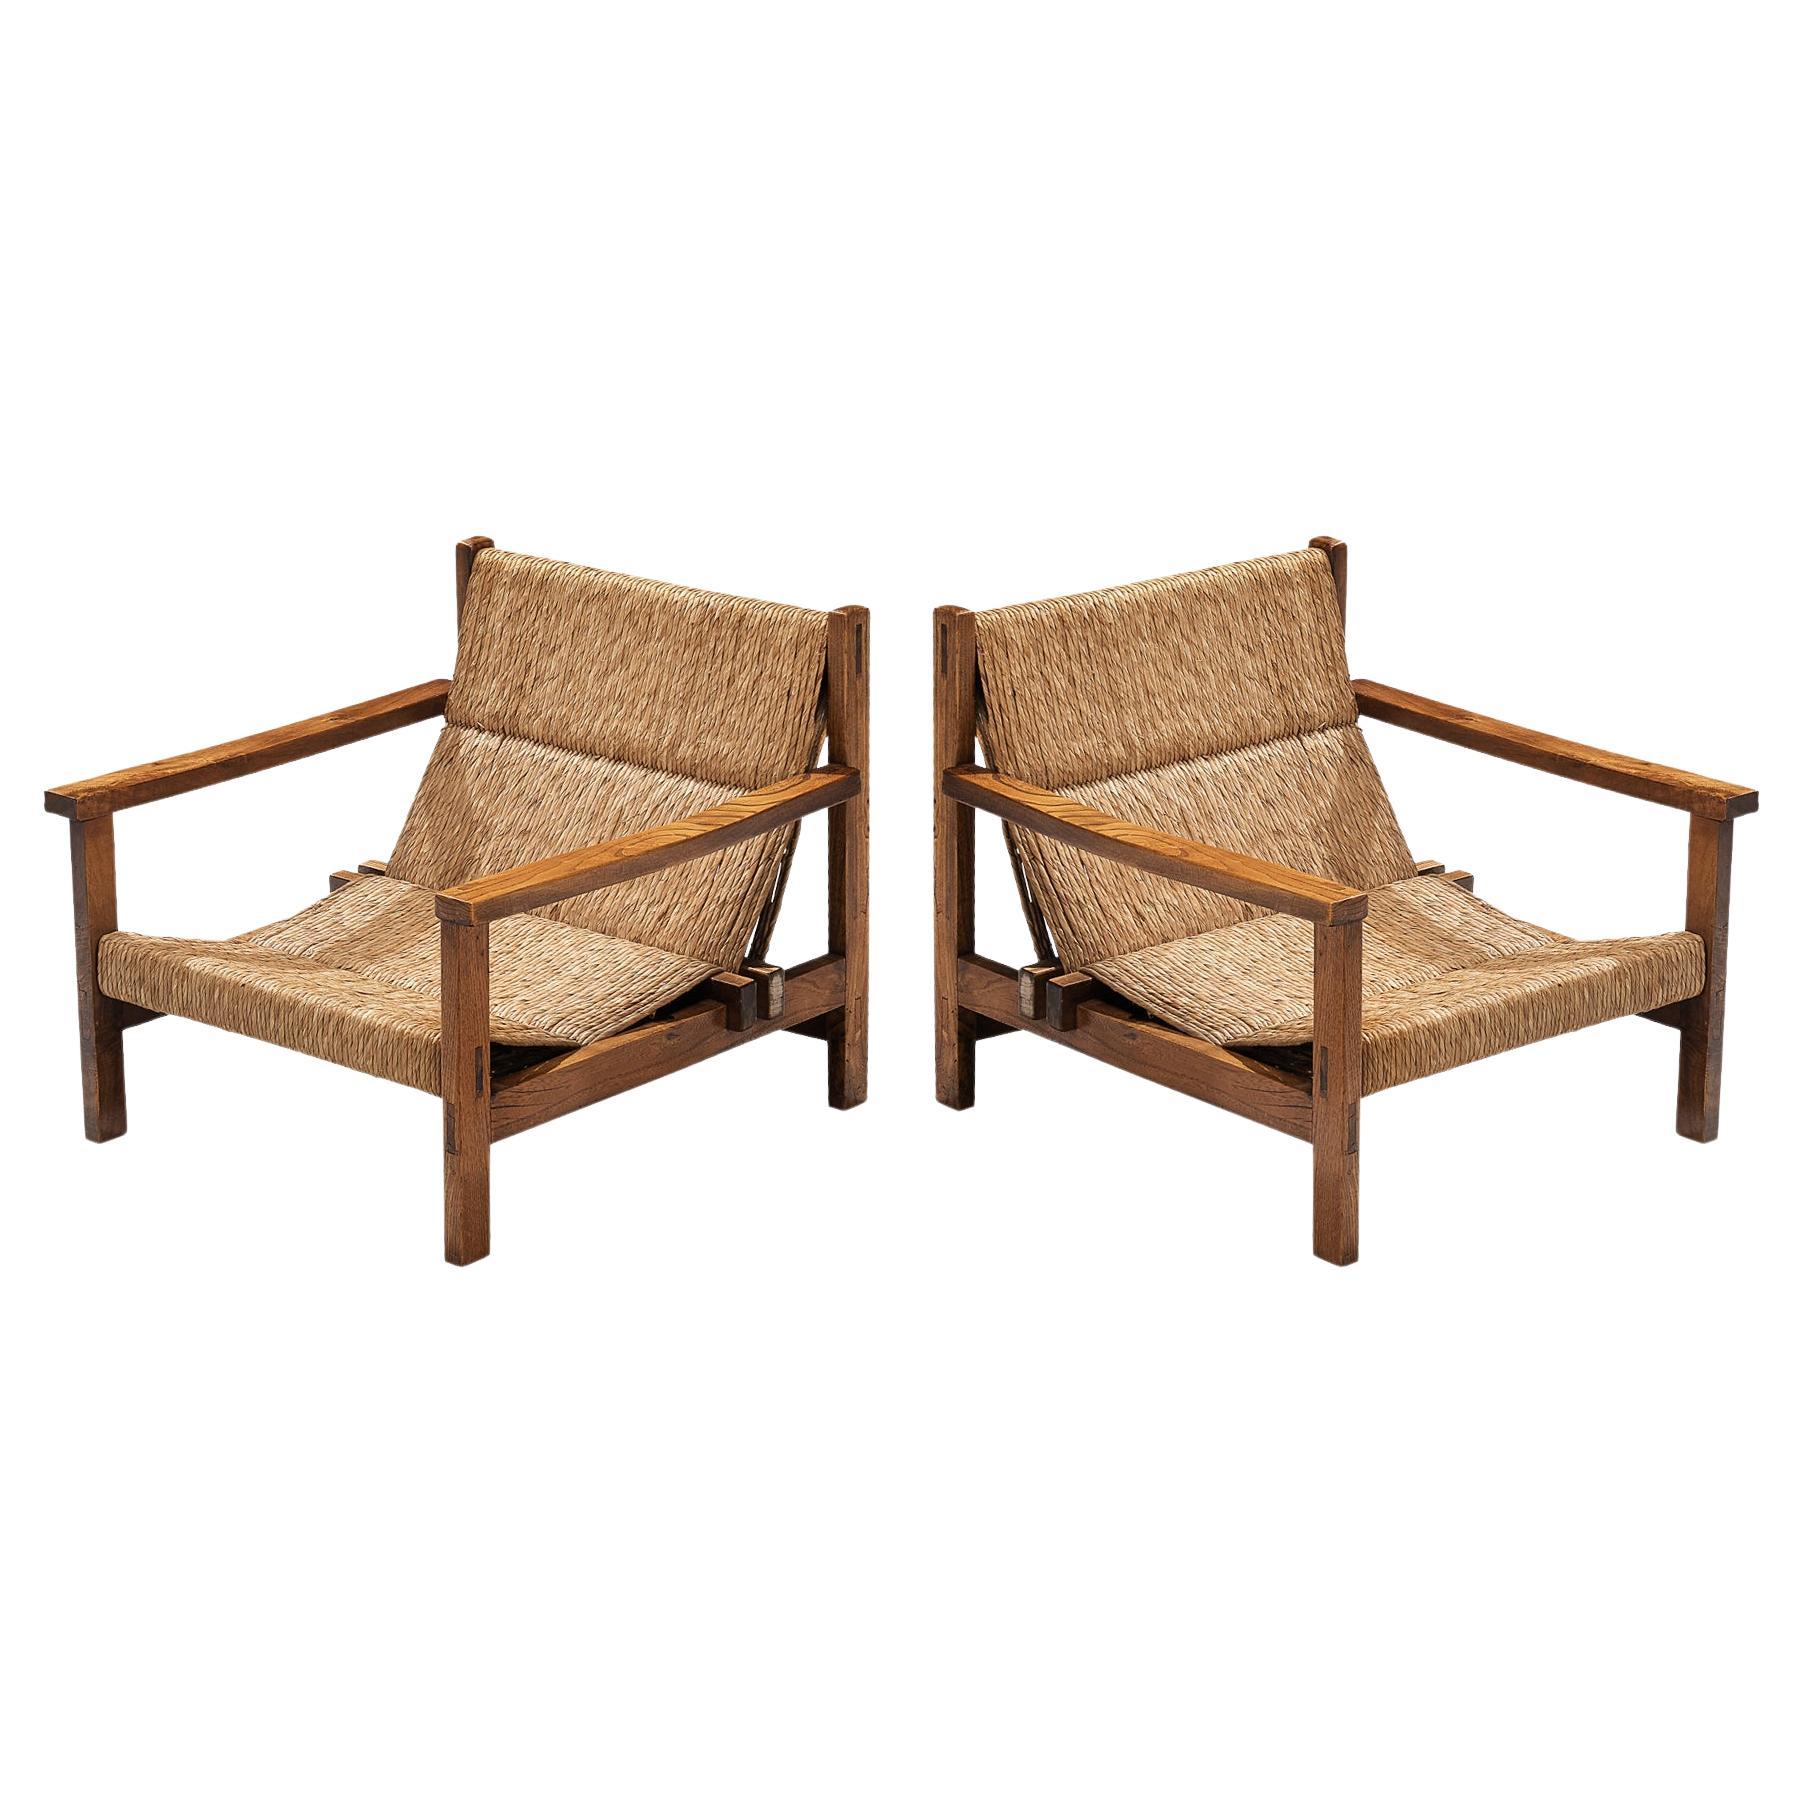 Spanish Pair of Rustic Armchairs in Stained Elm and Straw